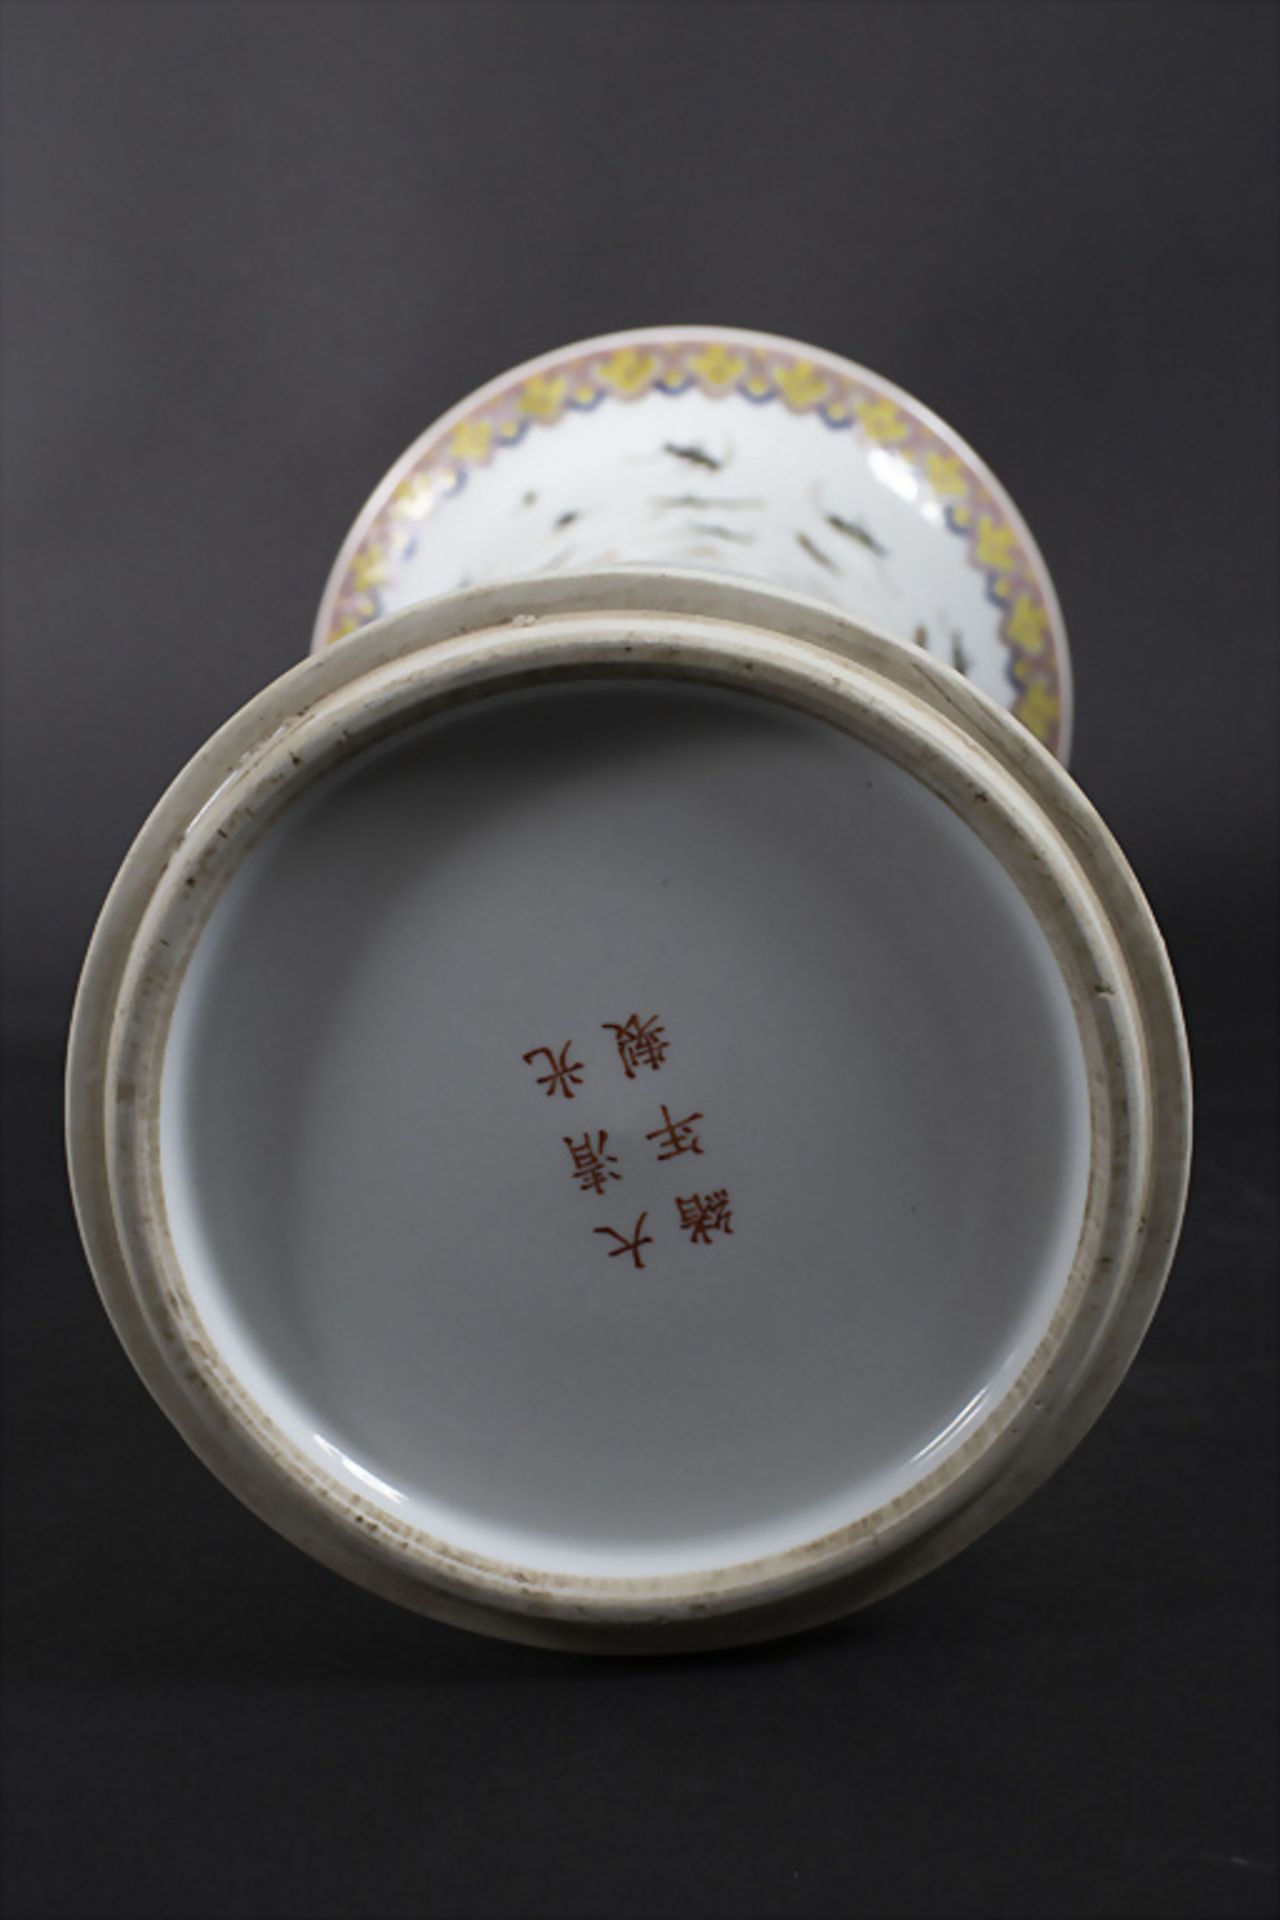 Porzellanvase mit Insekten in Gu Form / A GU shaped porcelain vase wih insects, China, 19./20. Jh. - Image 9 of 9